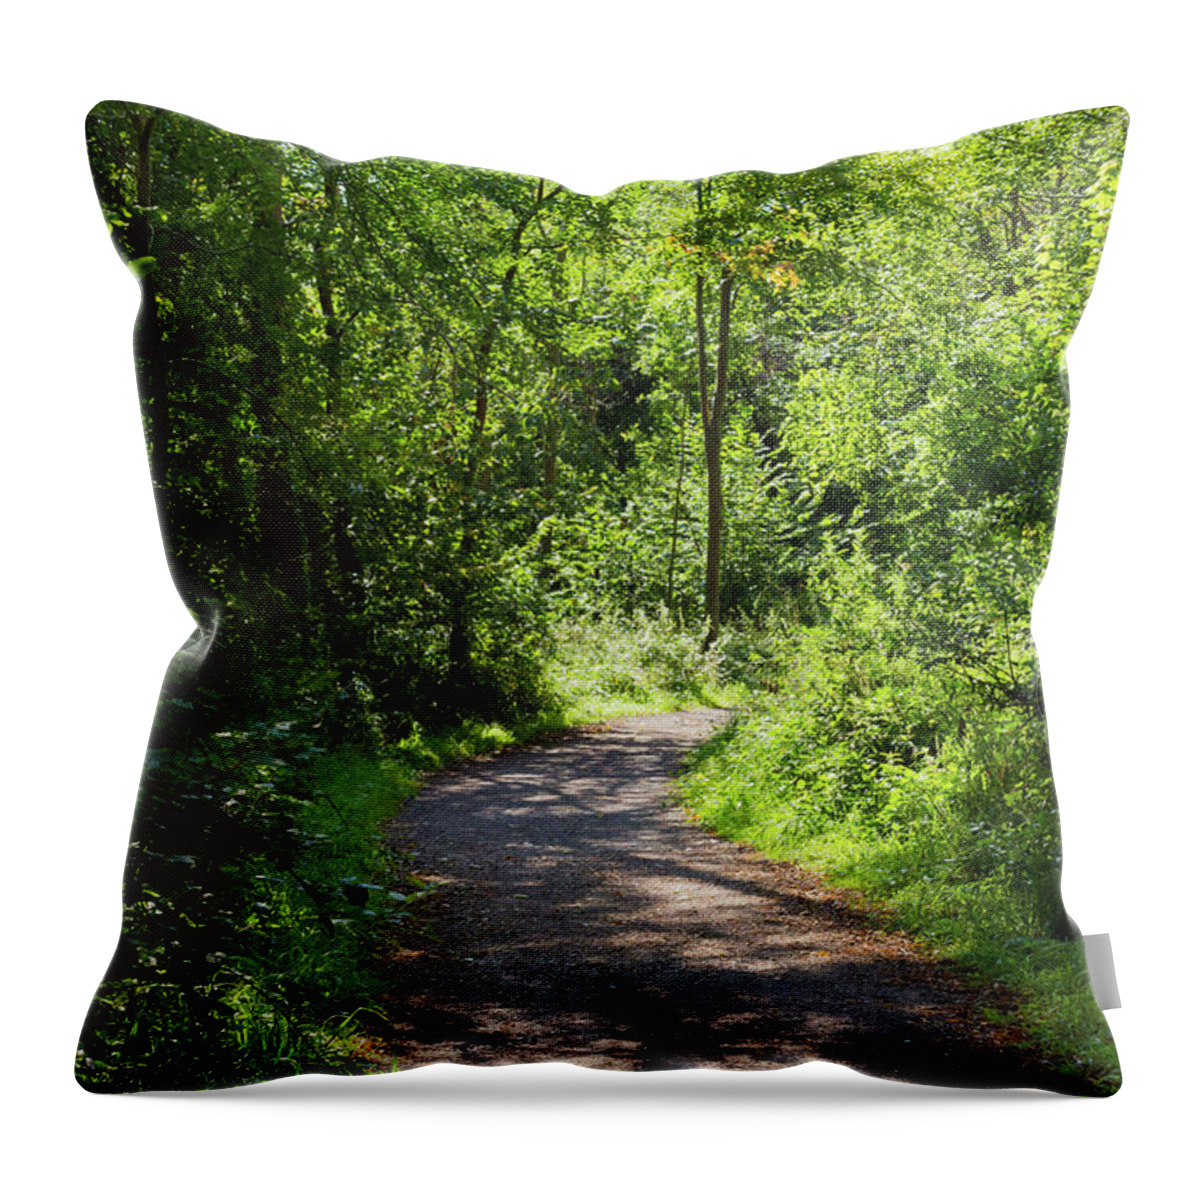 Woodland Throw Pillow featuring the photograph Pathway Through The Woods by Tanya C Smith